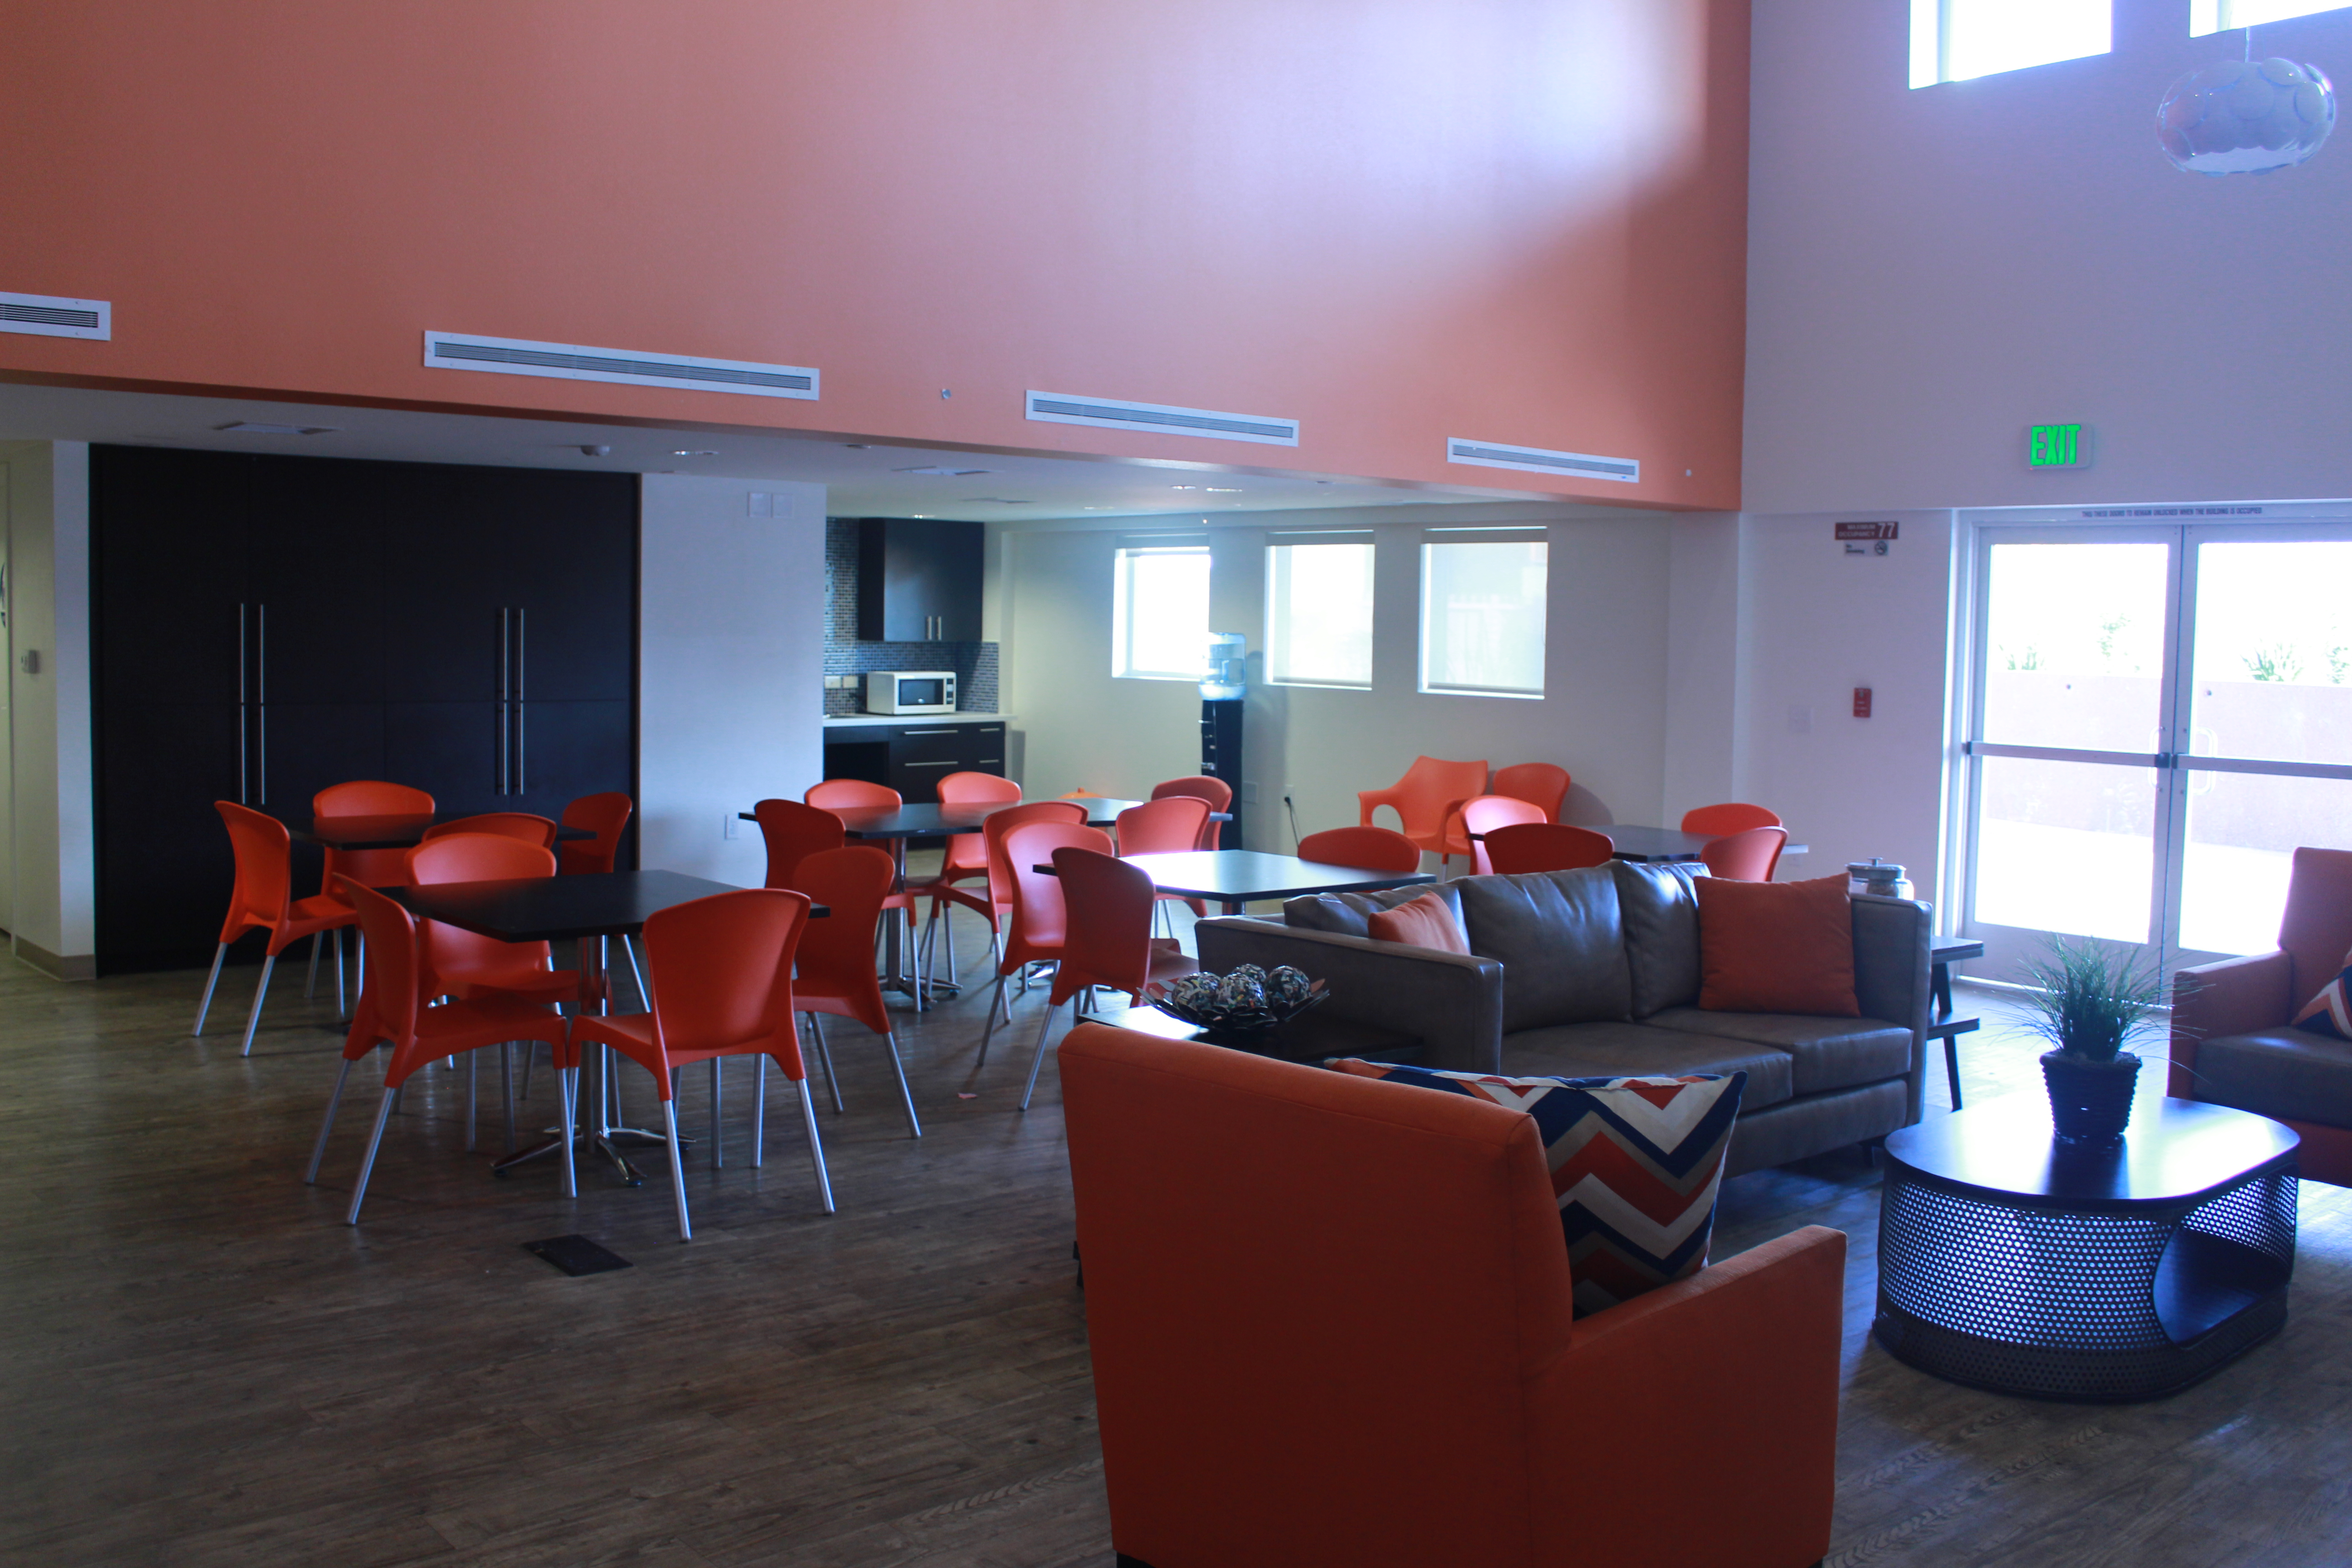 Community room, five brown square tables with four plastic orange chairs, a long brown sofa and two orange sofa chairs, brown oval coffee table in the middle with a plant base on top, multiple decorative pillows on the sofas, a counter with a microwave to